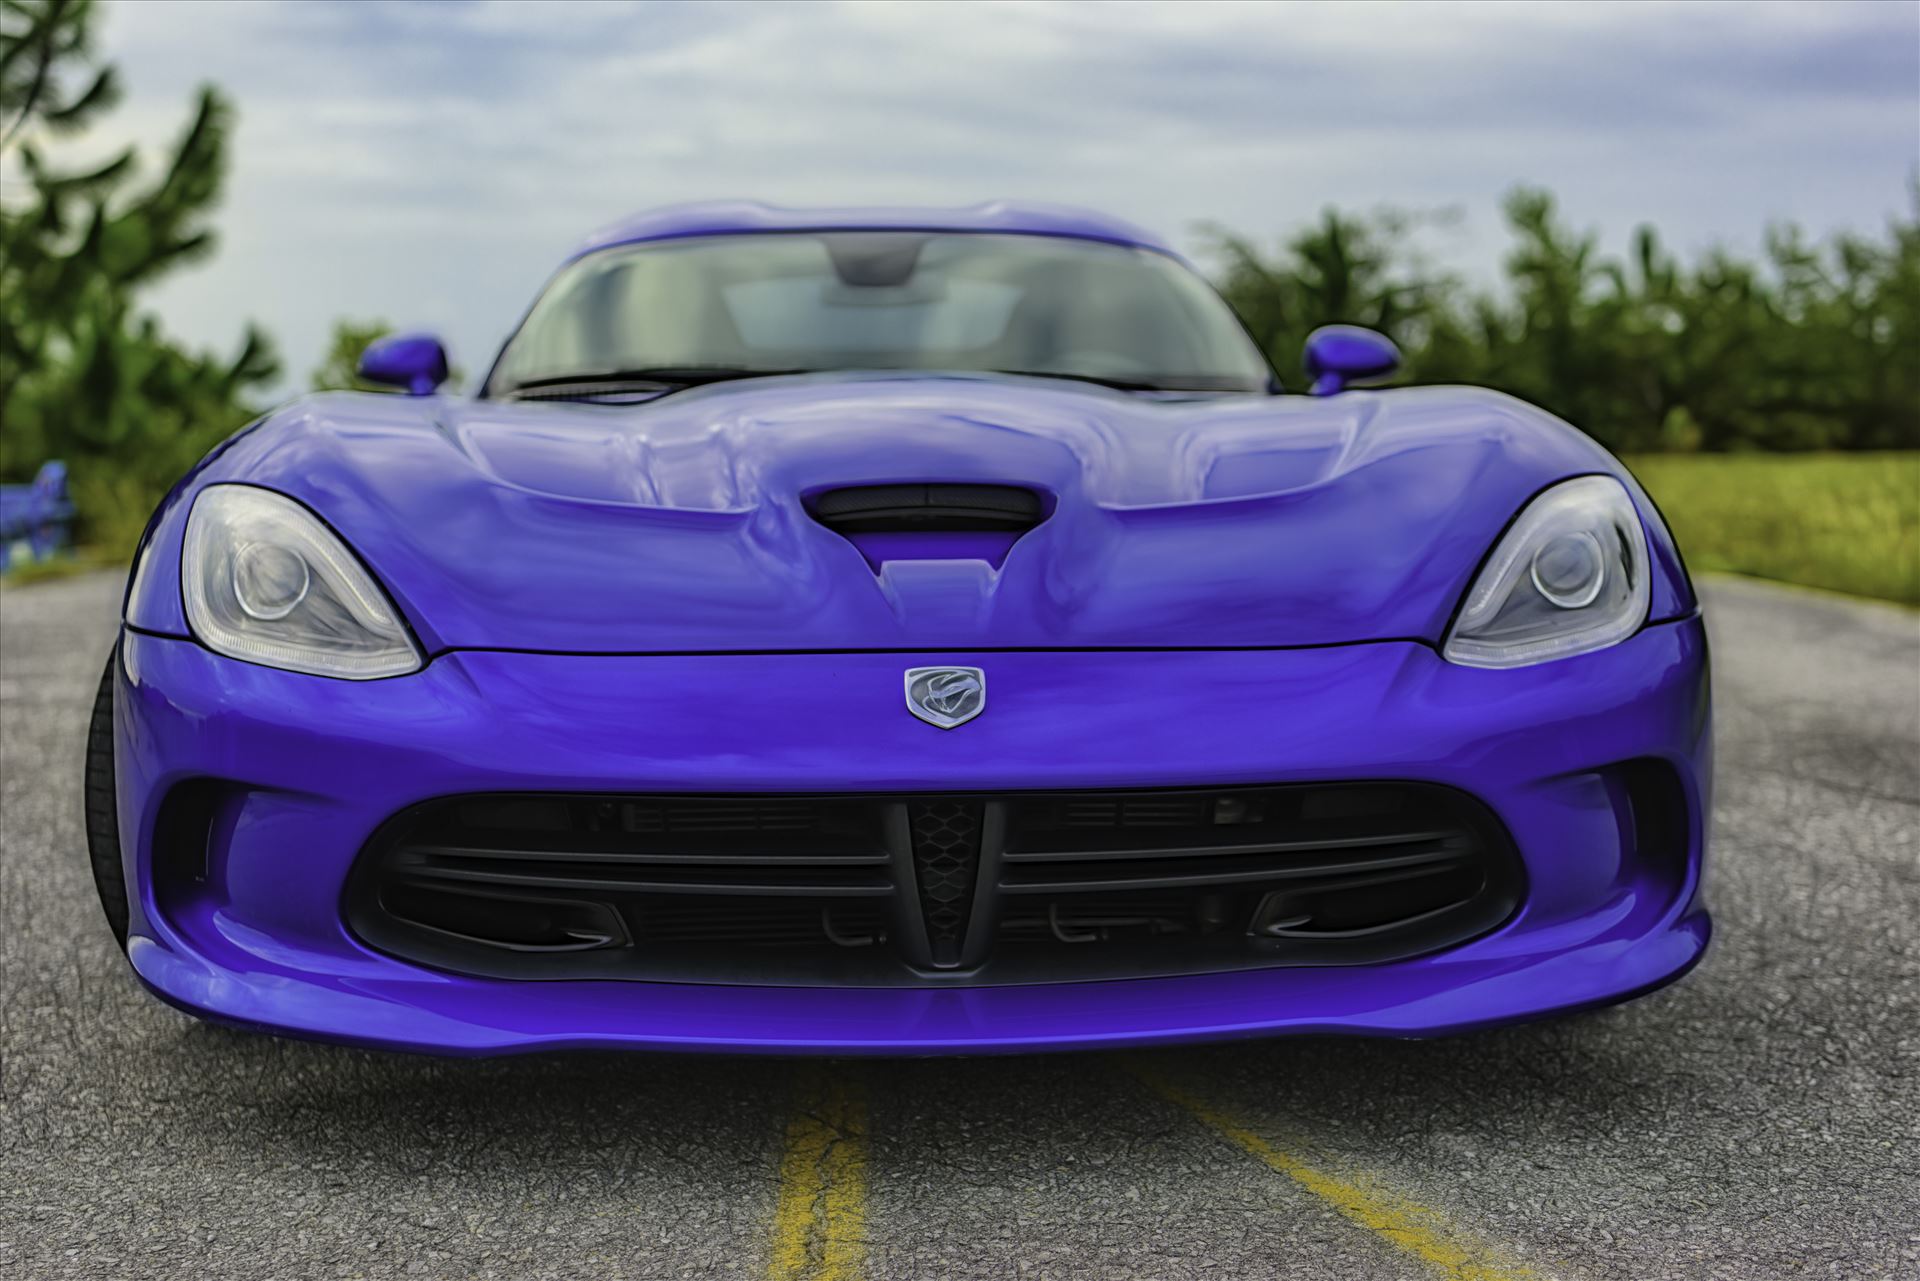 viper 5098.jpg -  by Terry Kelly Photography